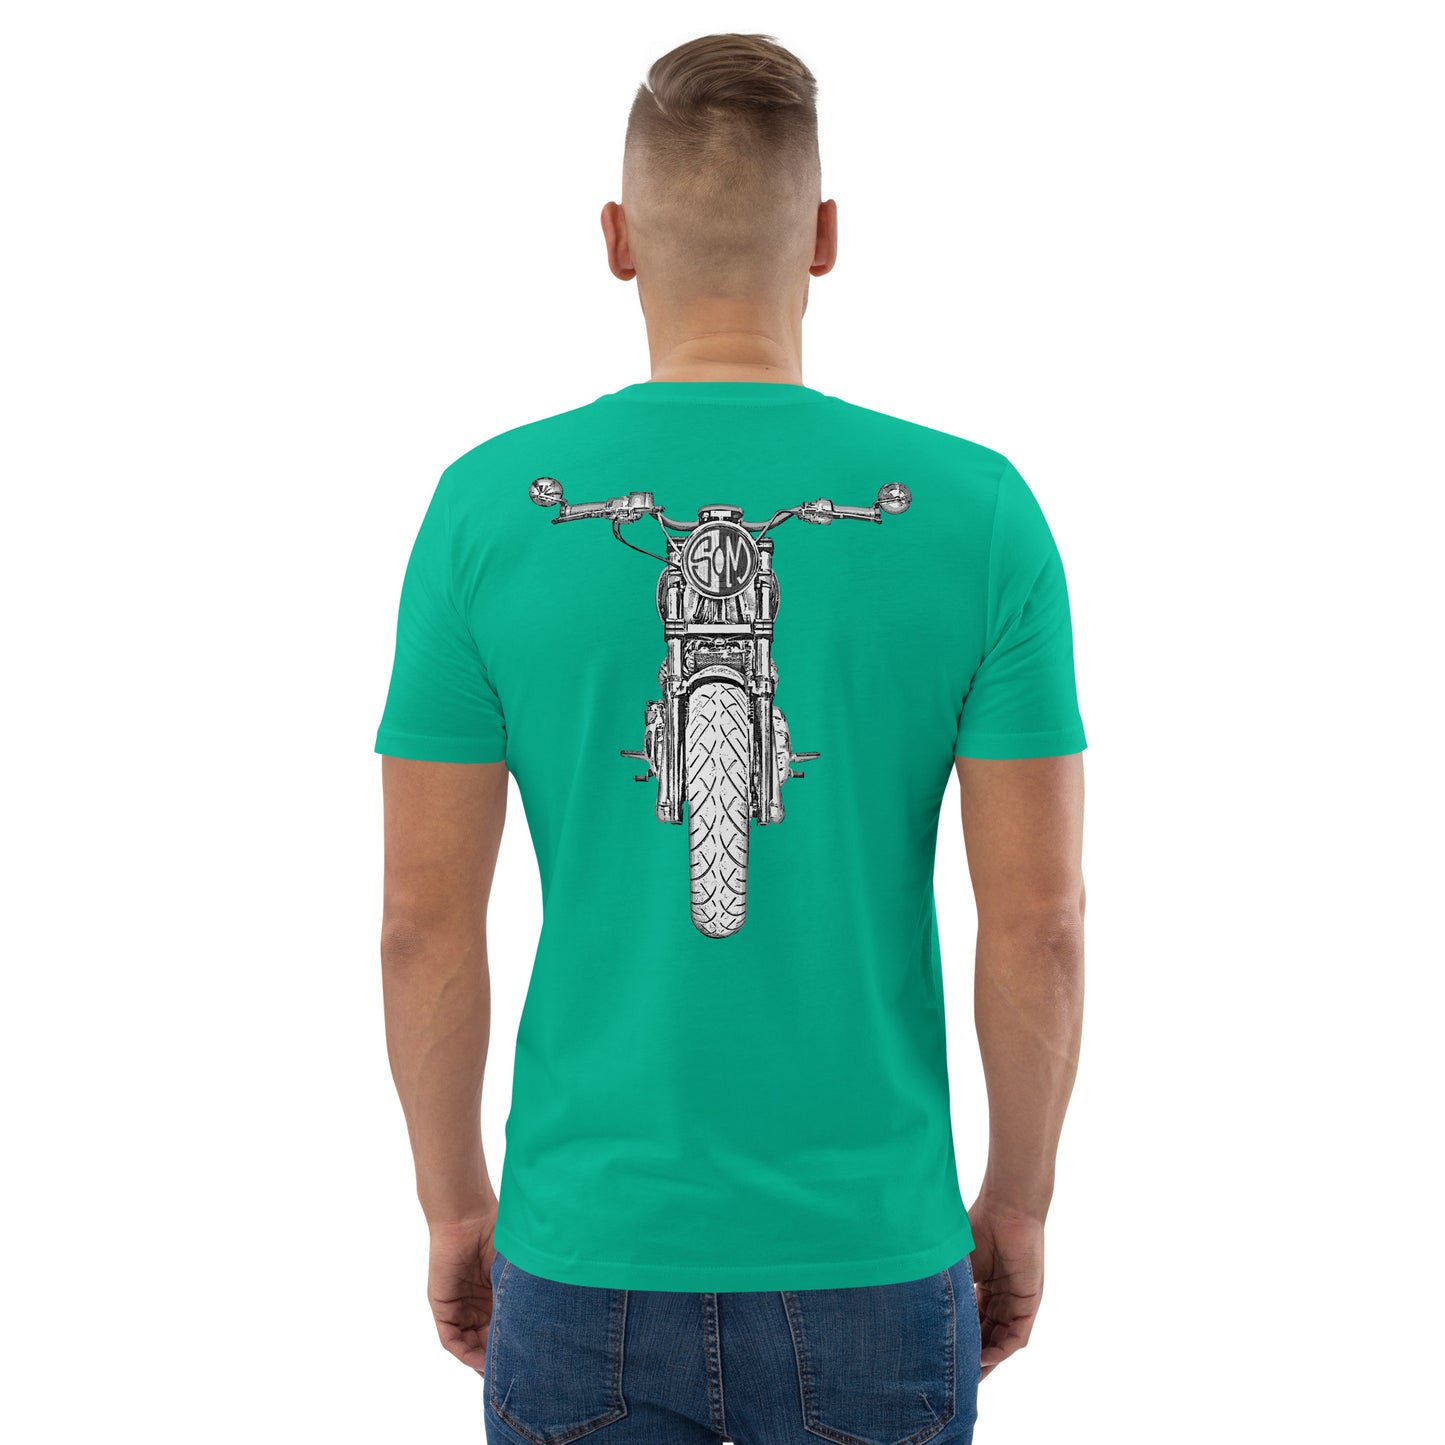 Sold Out Motorcycles 'Interceptor' Cotton T-Shirt